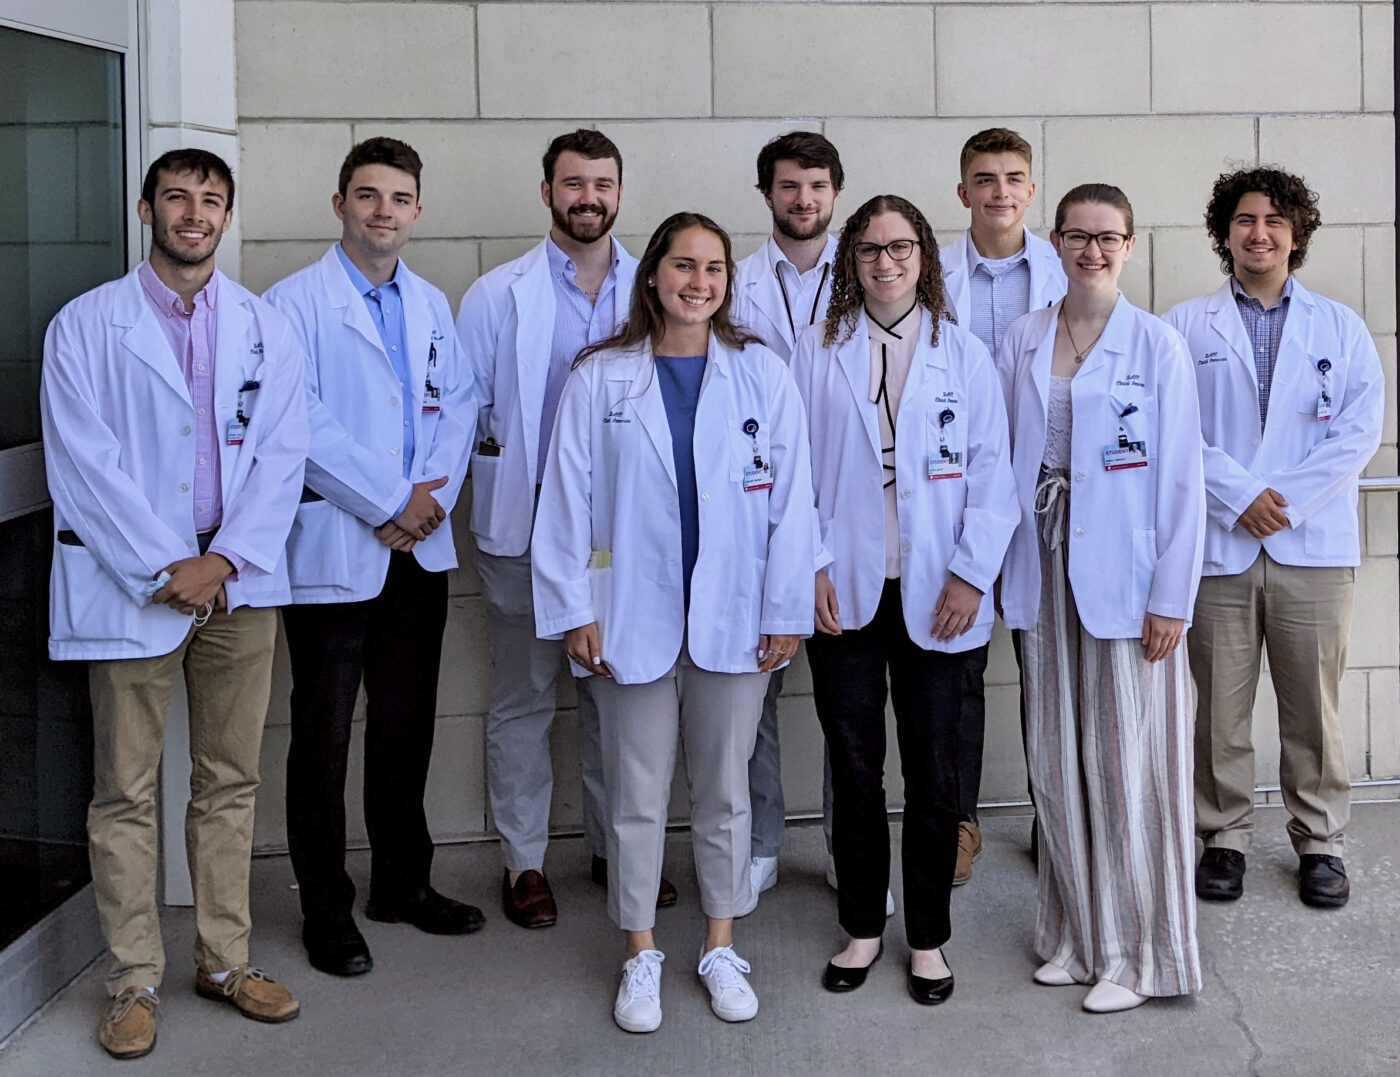 A group of medical students posing for a photo